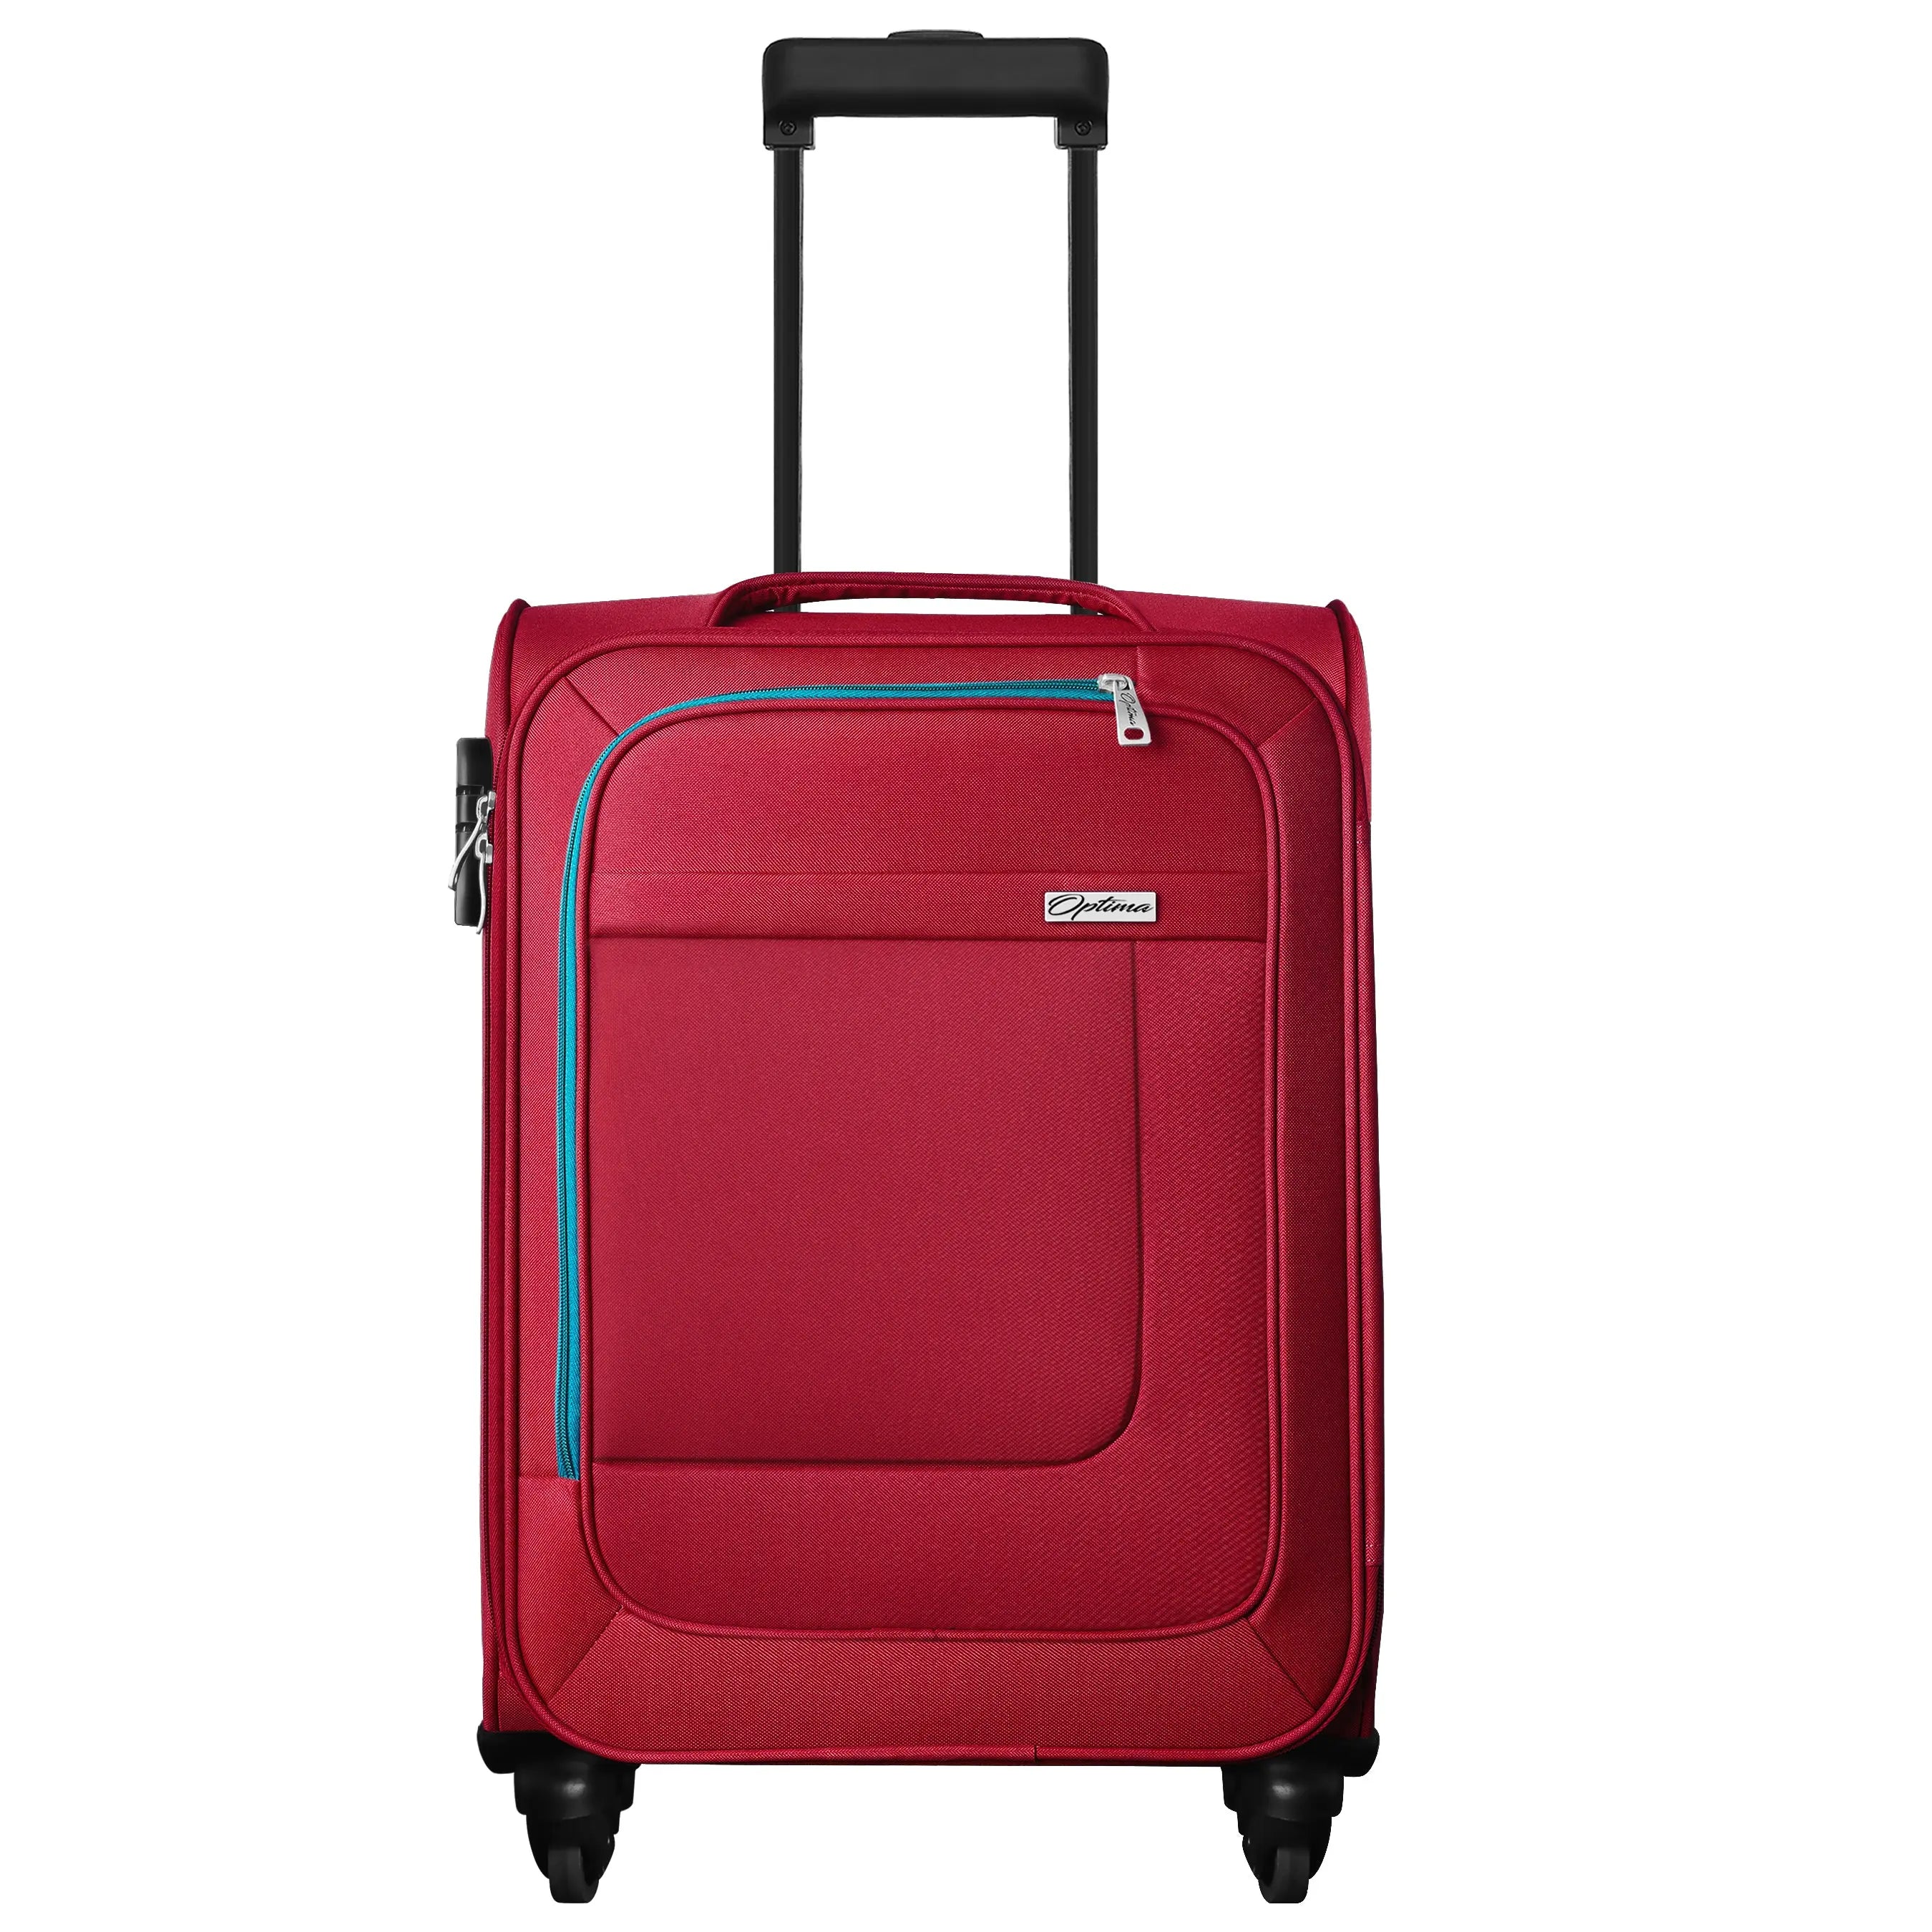 it Luggage | Suitcases, Cabin Bags & Luggage designed in UK